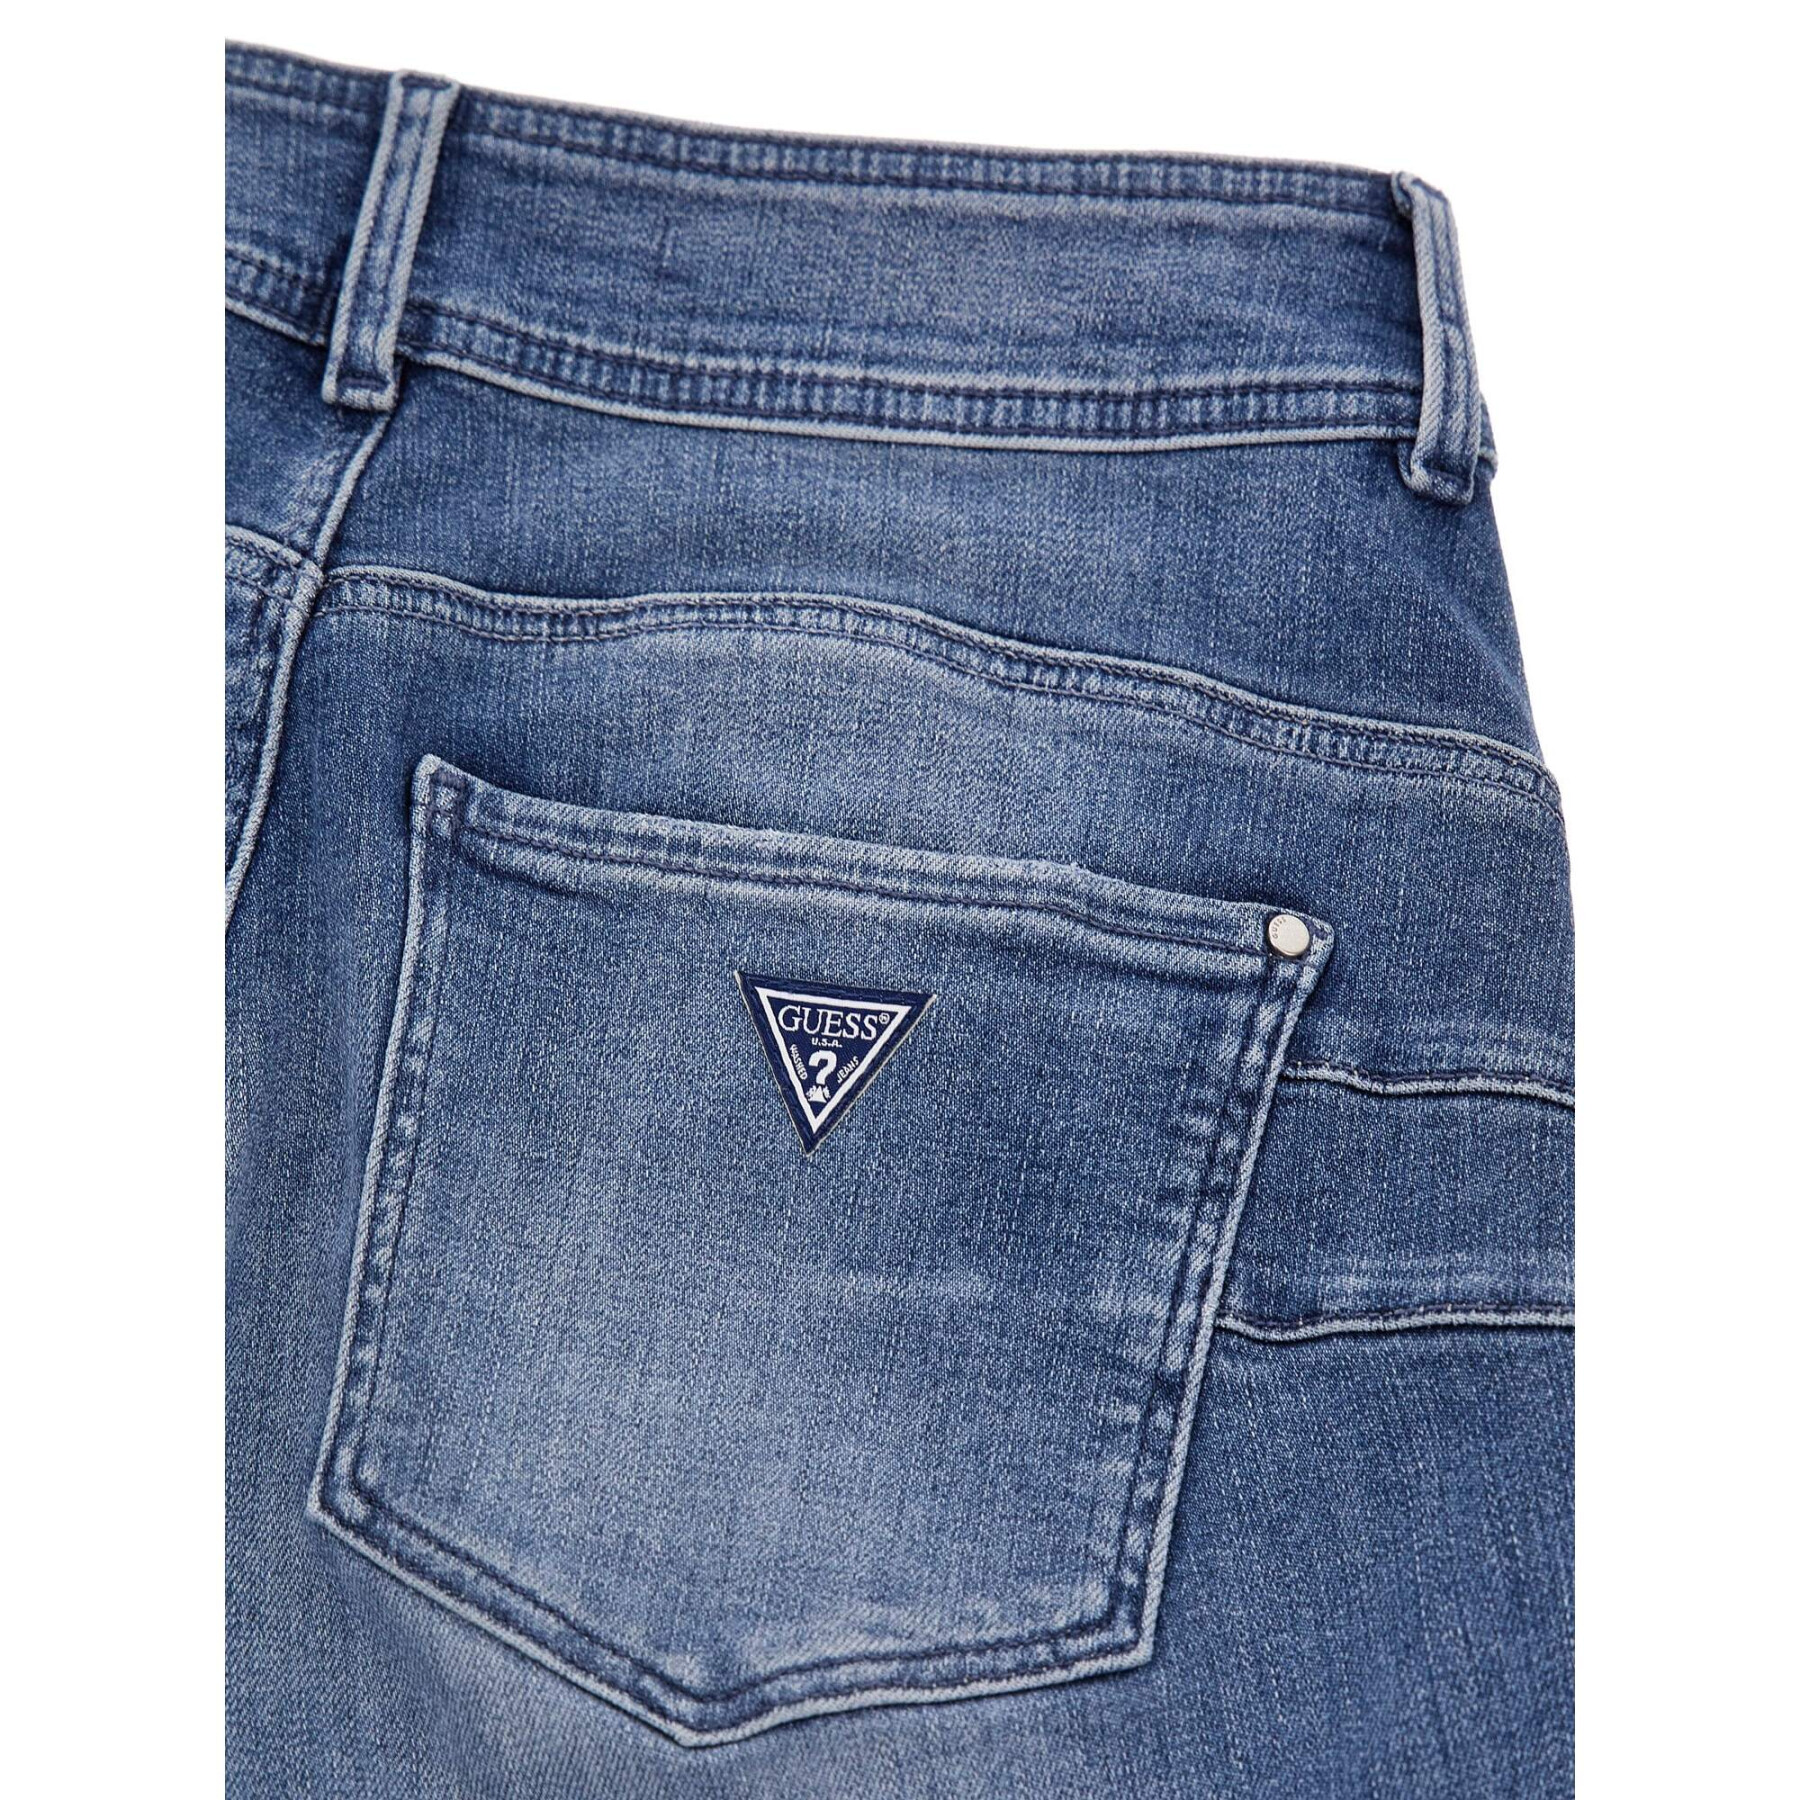 Women's jeans Guess Straight